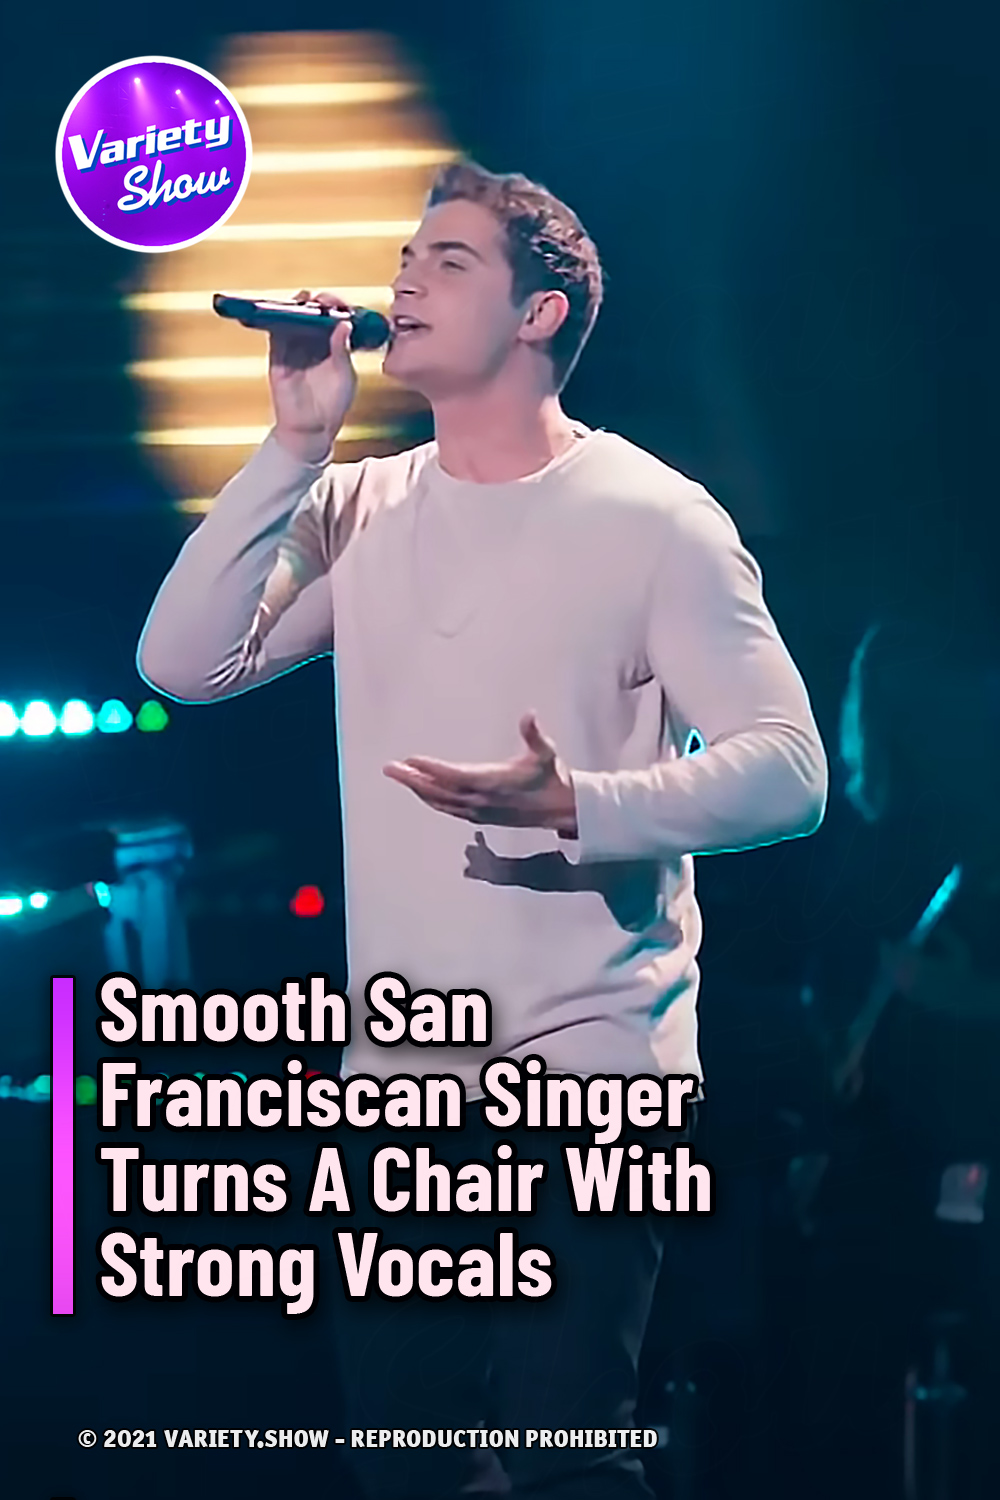 Smooth San Franciscan Singer Turns A Chair With Strong Vocals